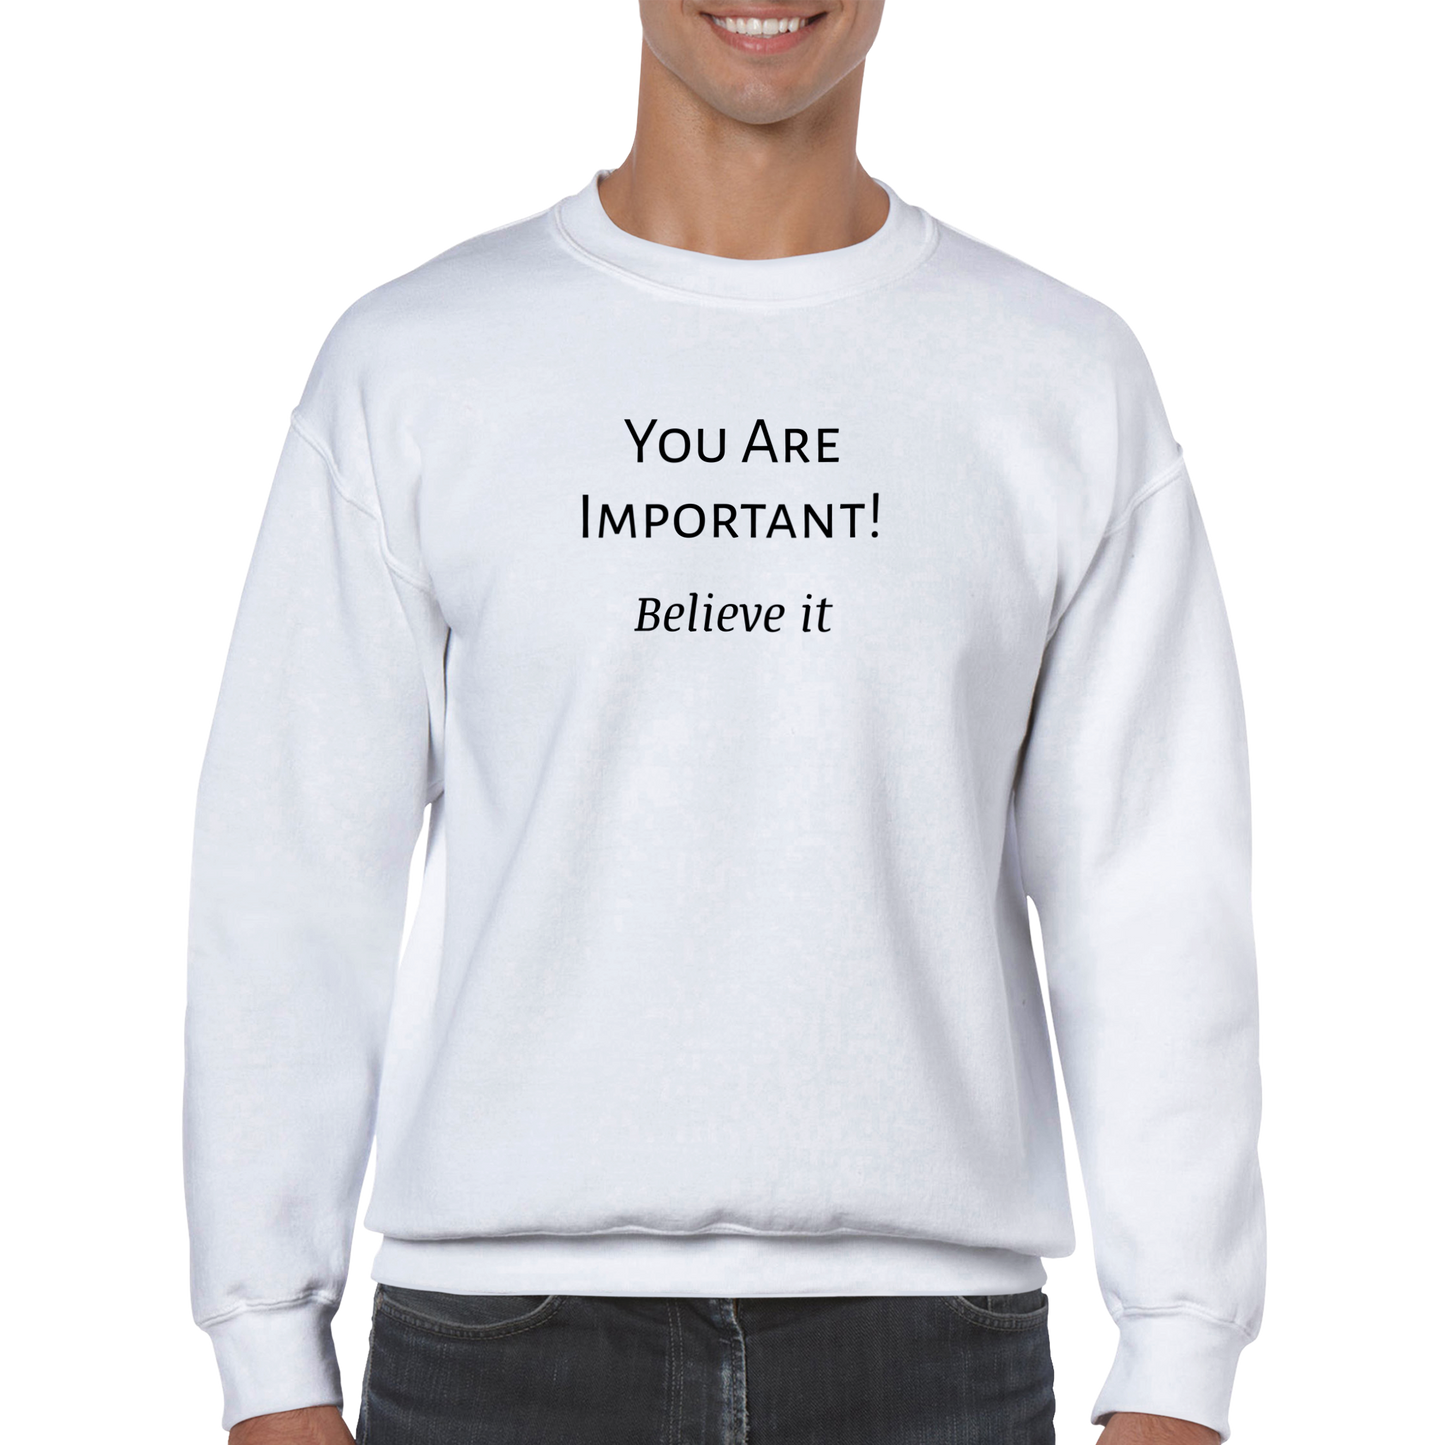 You Are Important! Classic Unisex Crewneck Sweatshirt. Wear it and share it forward.